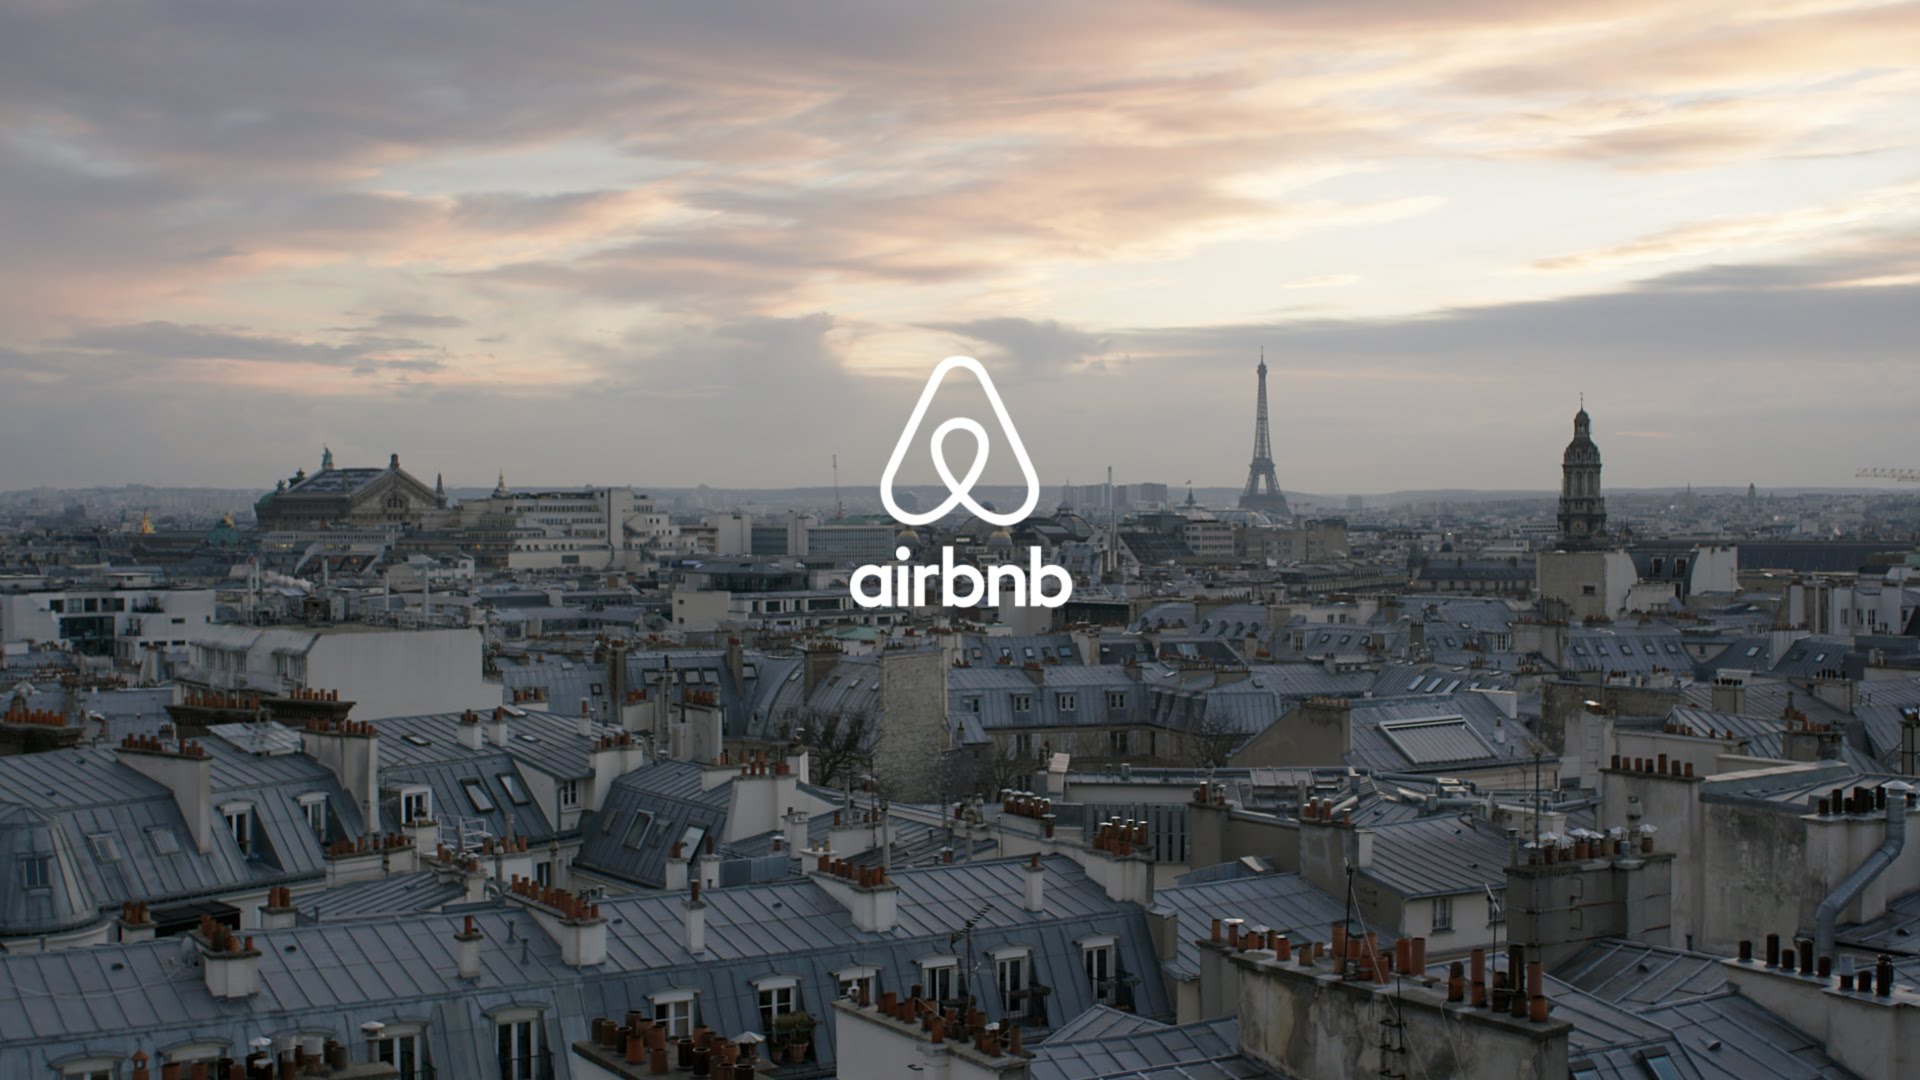 Airbnb CMO on his use of compelling video content